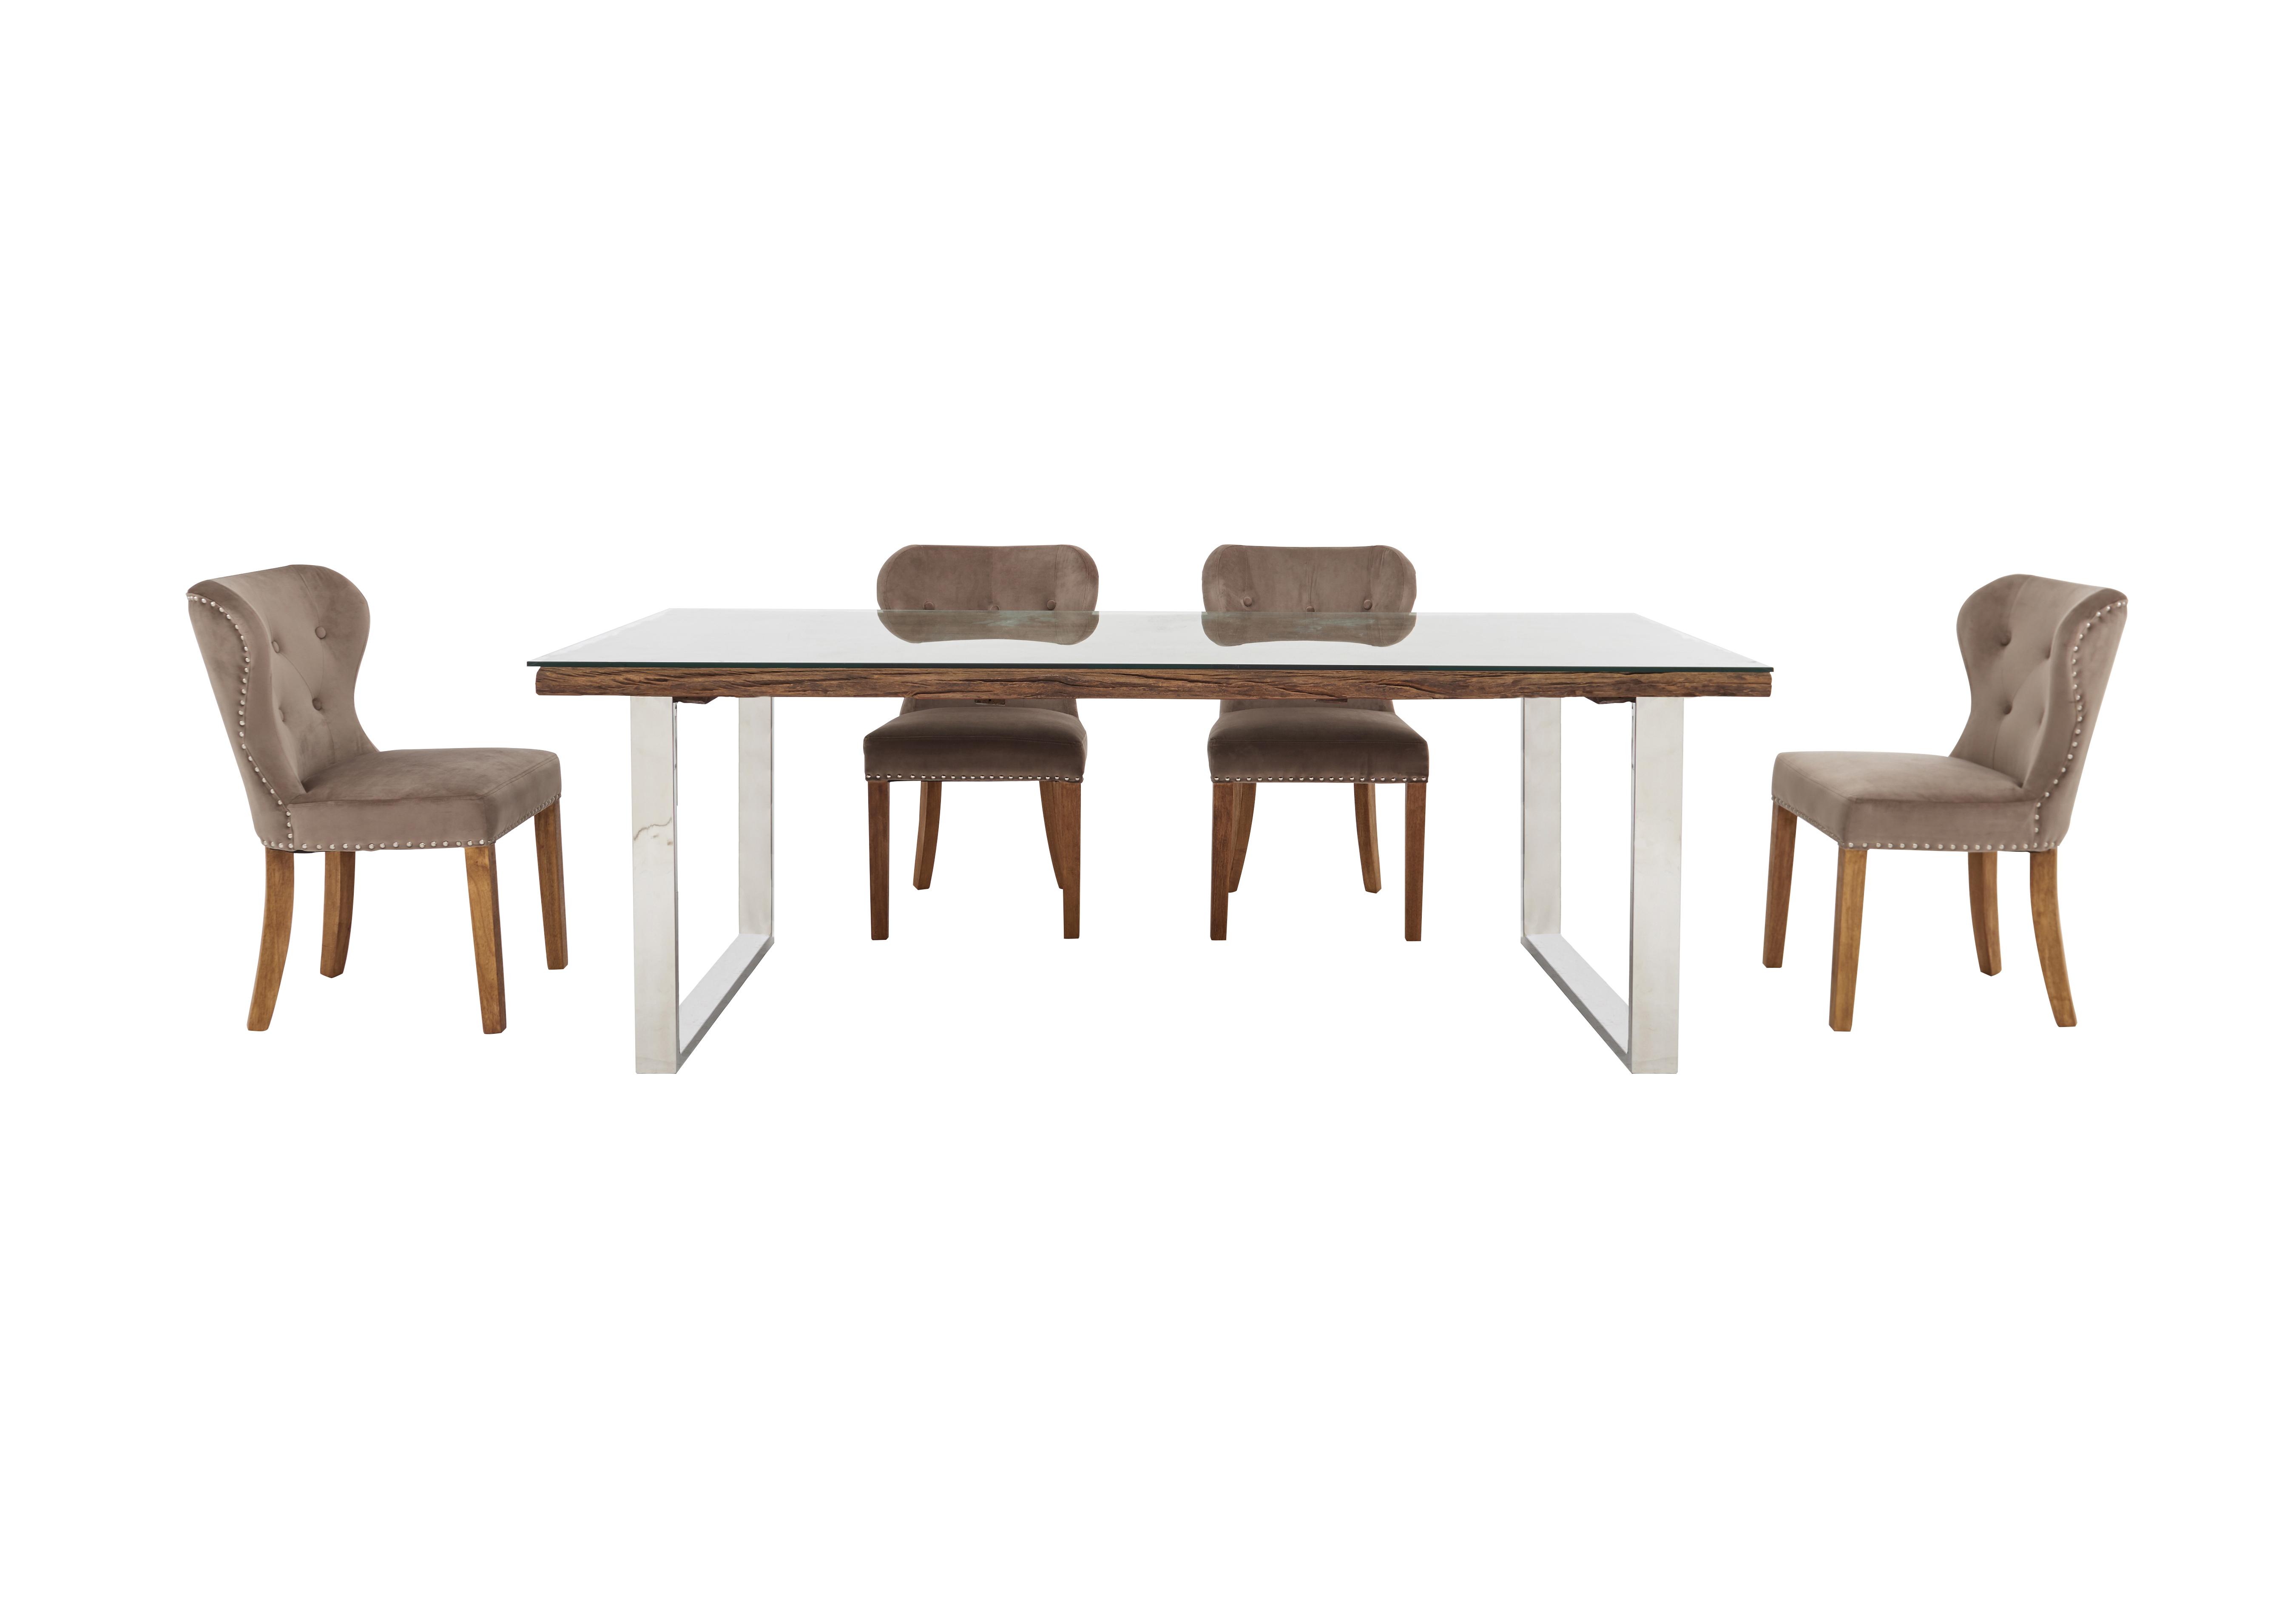 Chennai Dining Table with U-Shaped Legs and 4 Upholstered Chairs in Taupe Chairs on Furniture Village